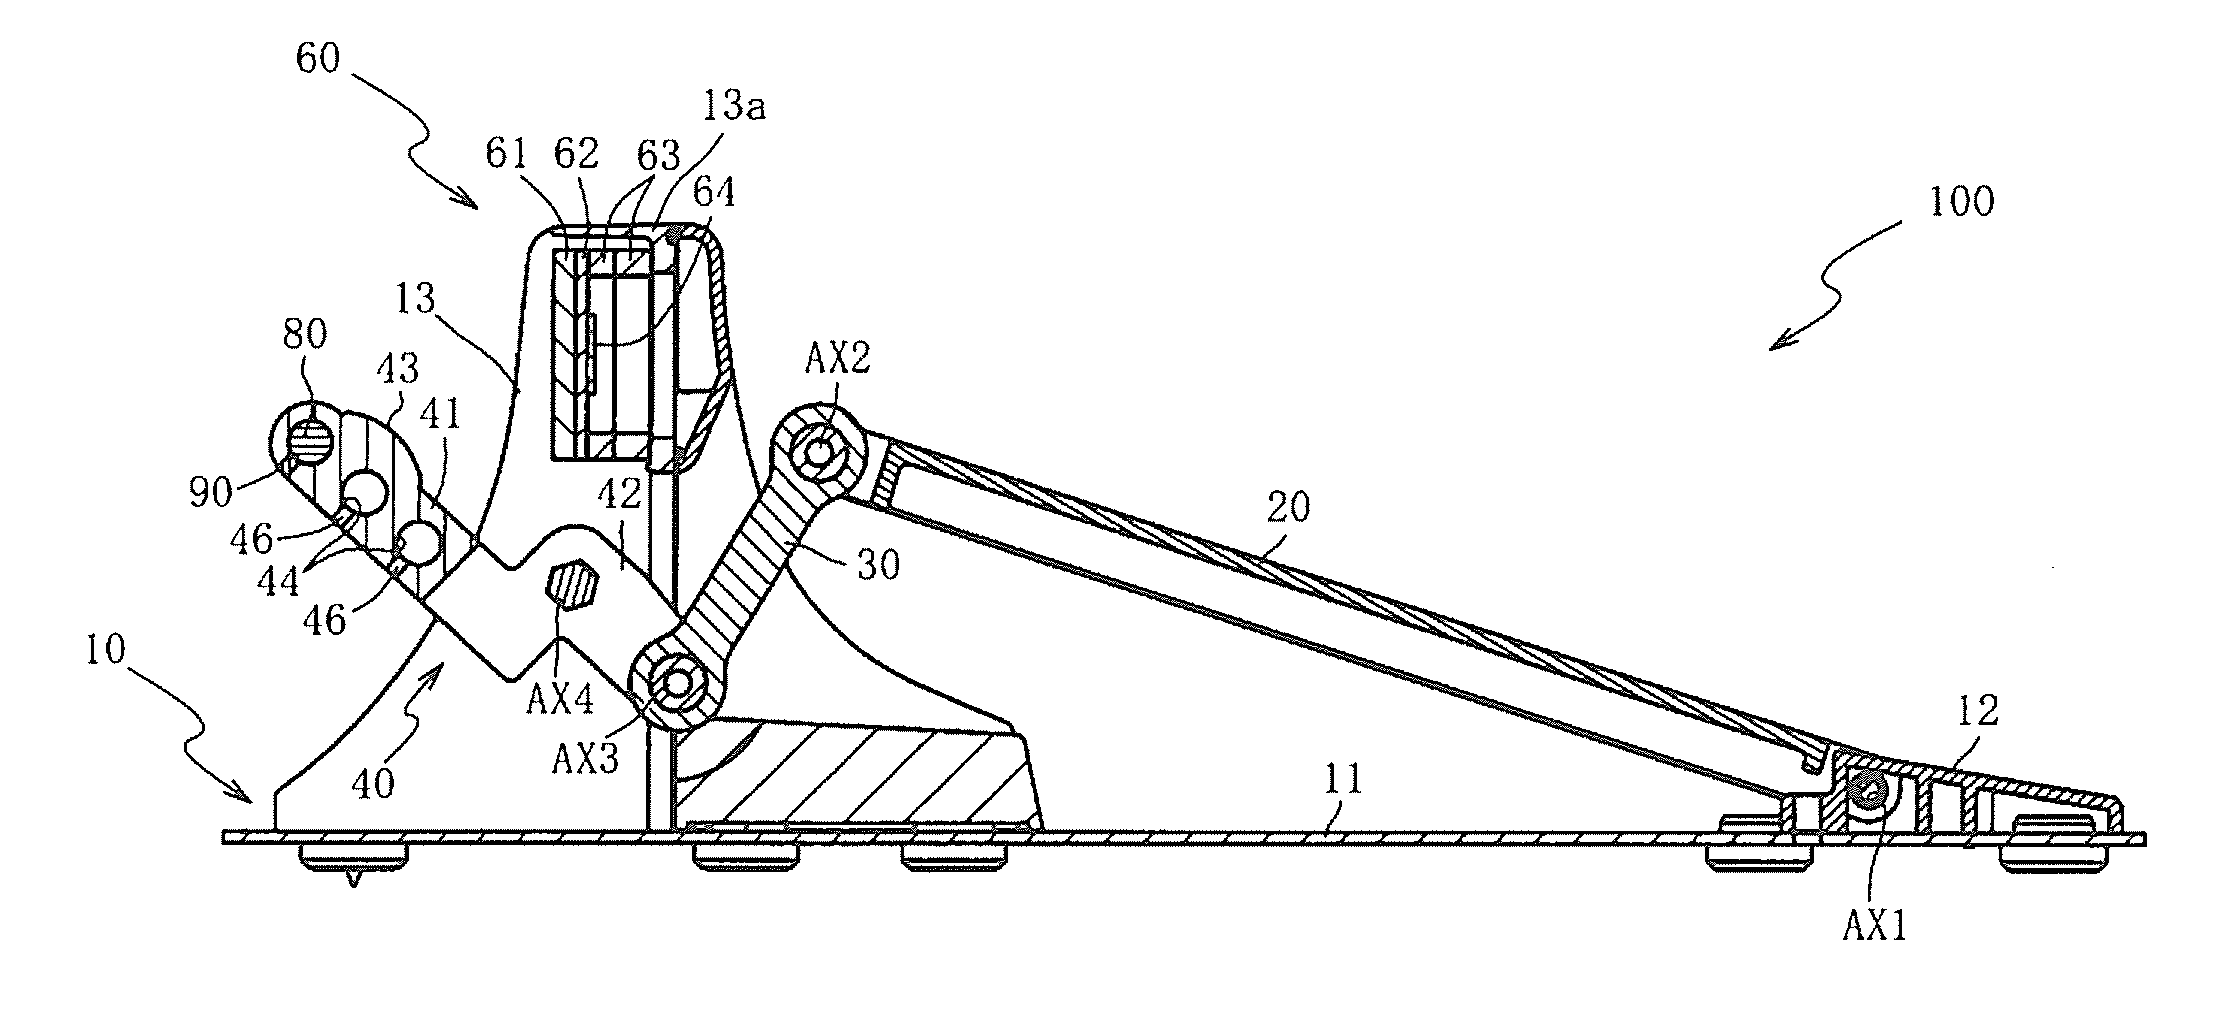 Pedal device for musical instrument